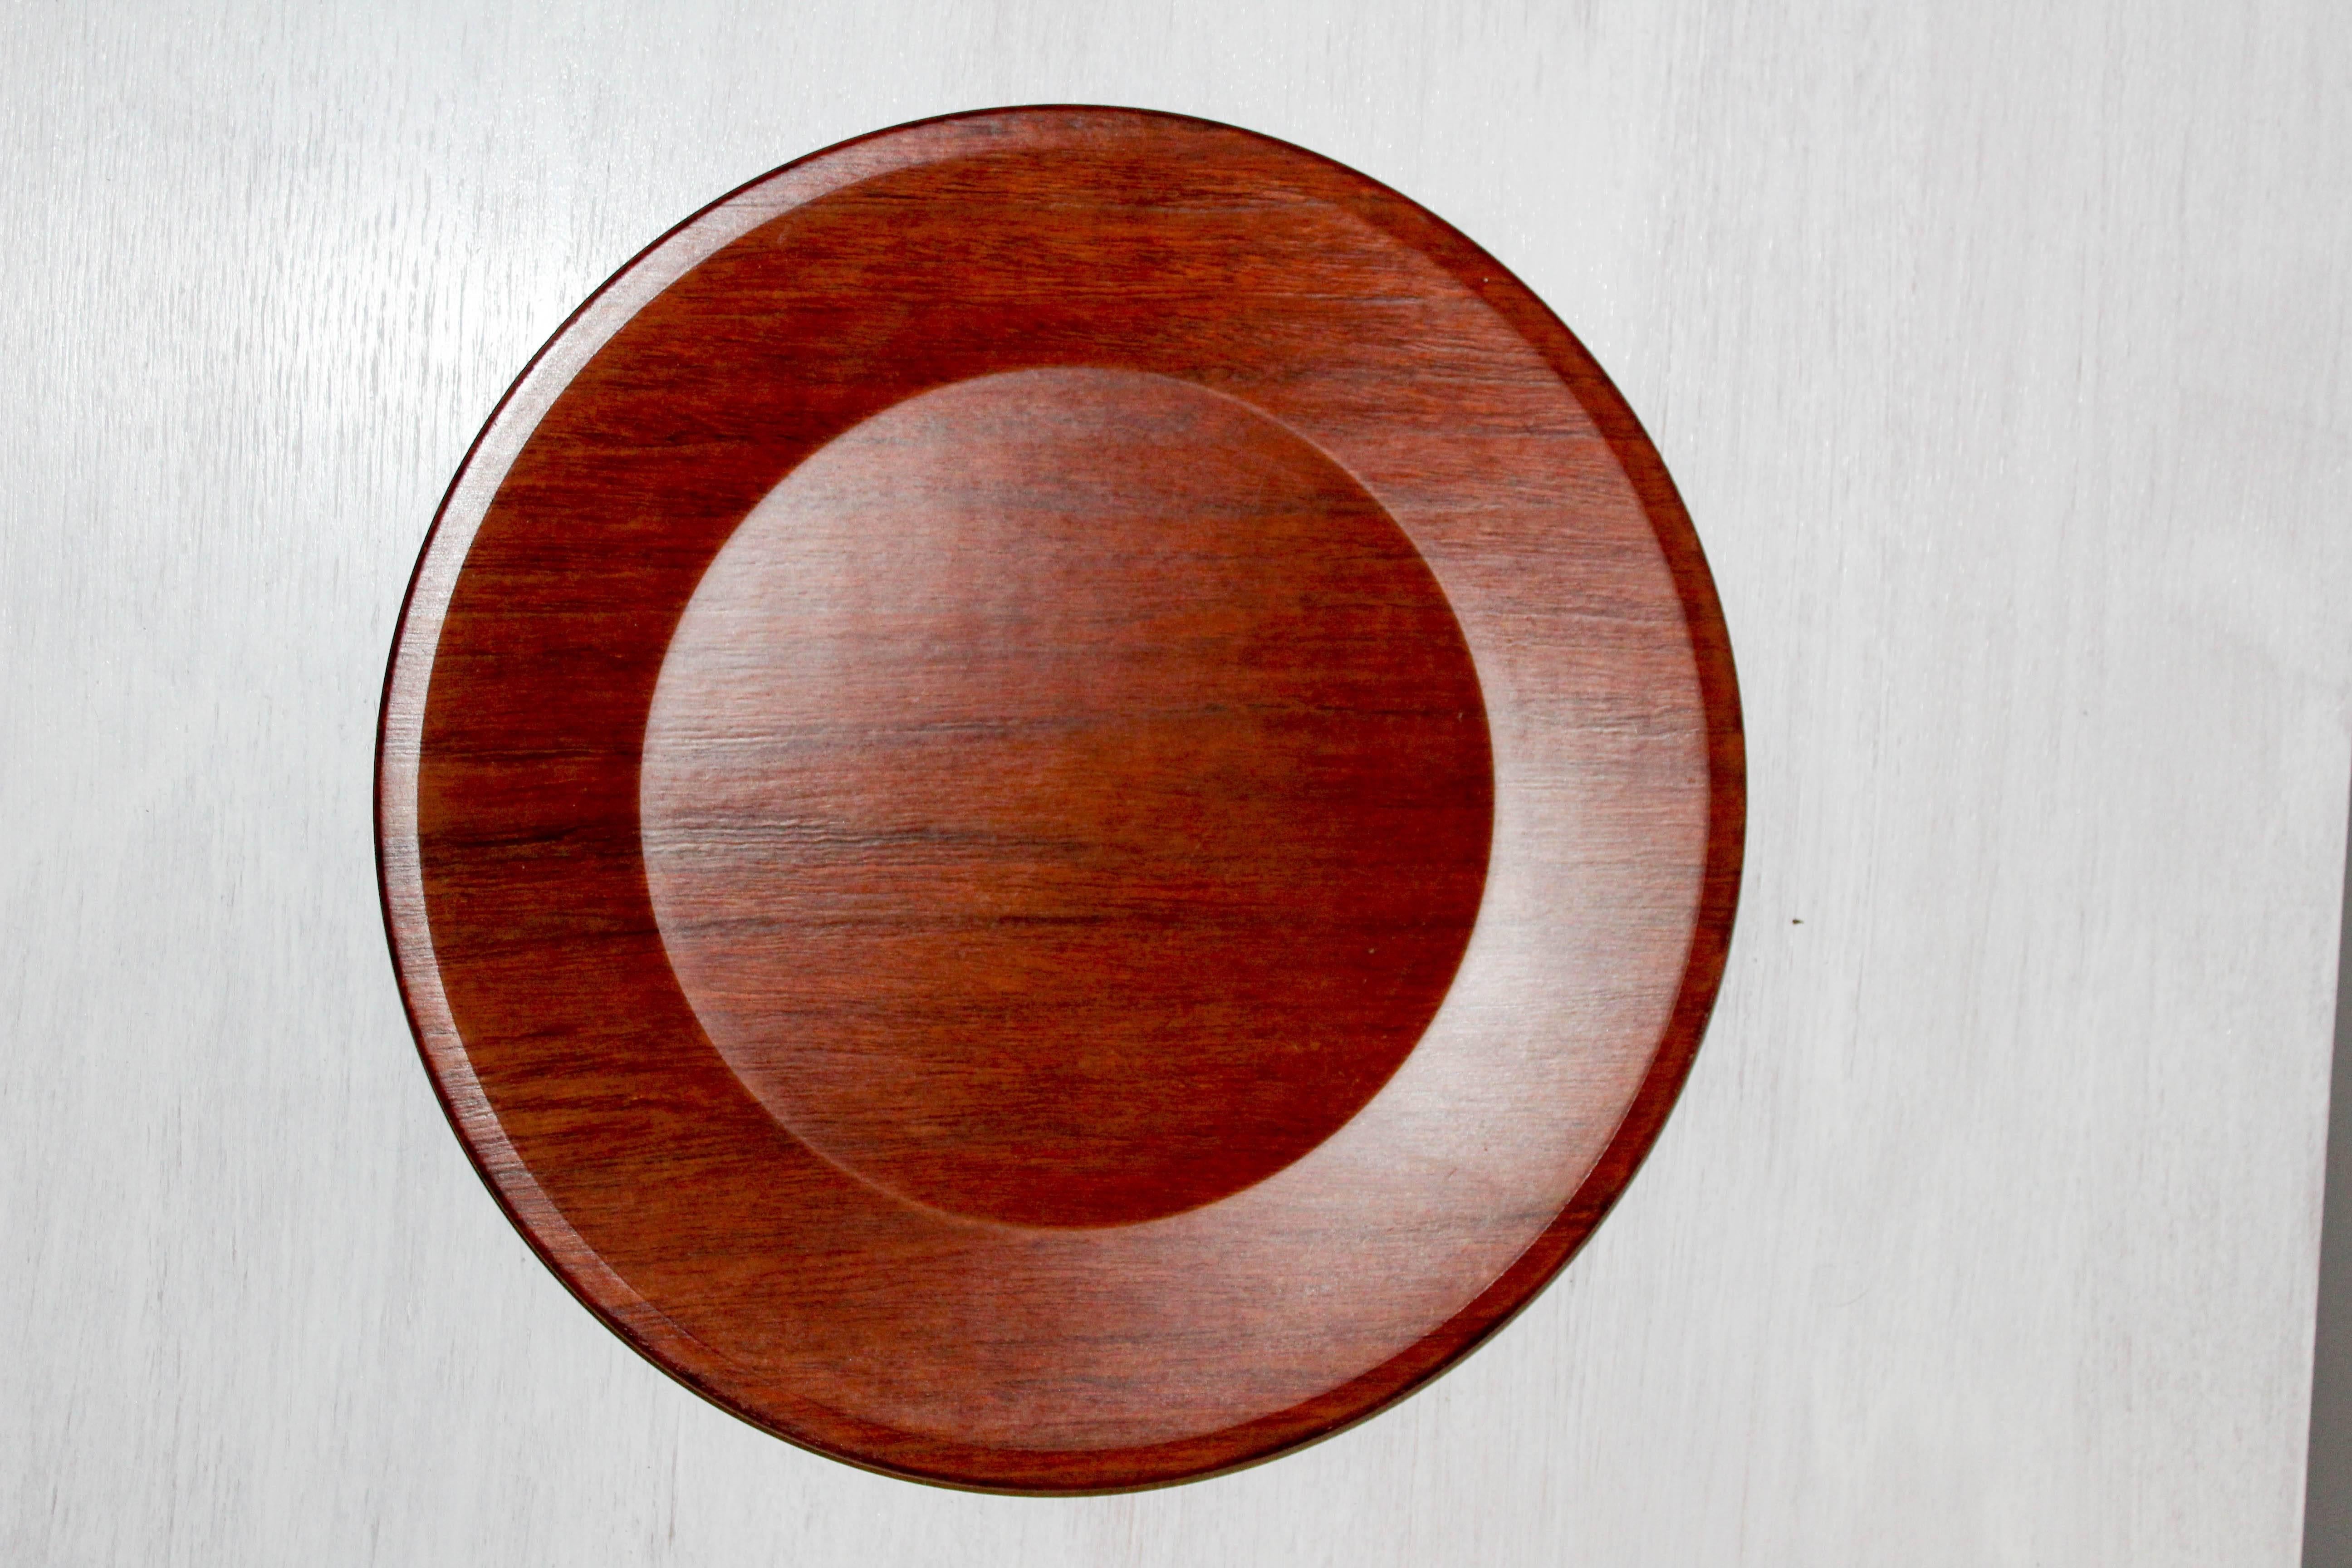 Set of 13 dining plates made out of teak, produced by Swedish company Silva. The plates are water, wine spirit and heat proof. 

The plates are in very good vintage condition with minor signs of usage. One plate is darker in color than the rest.